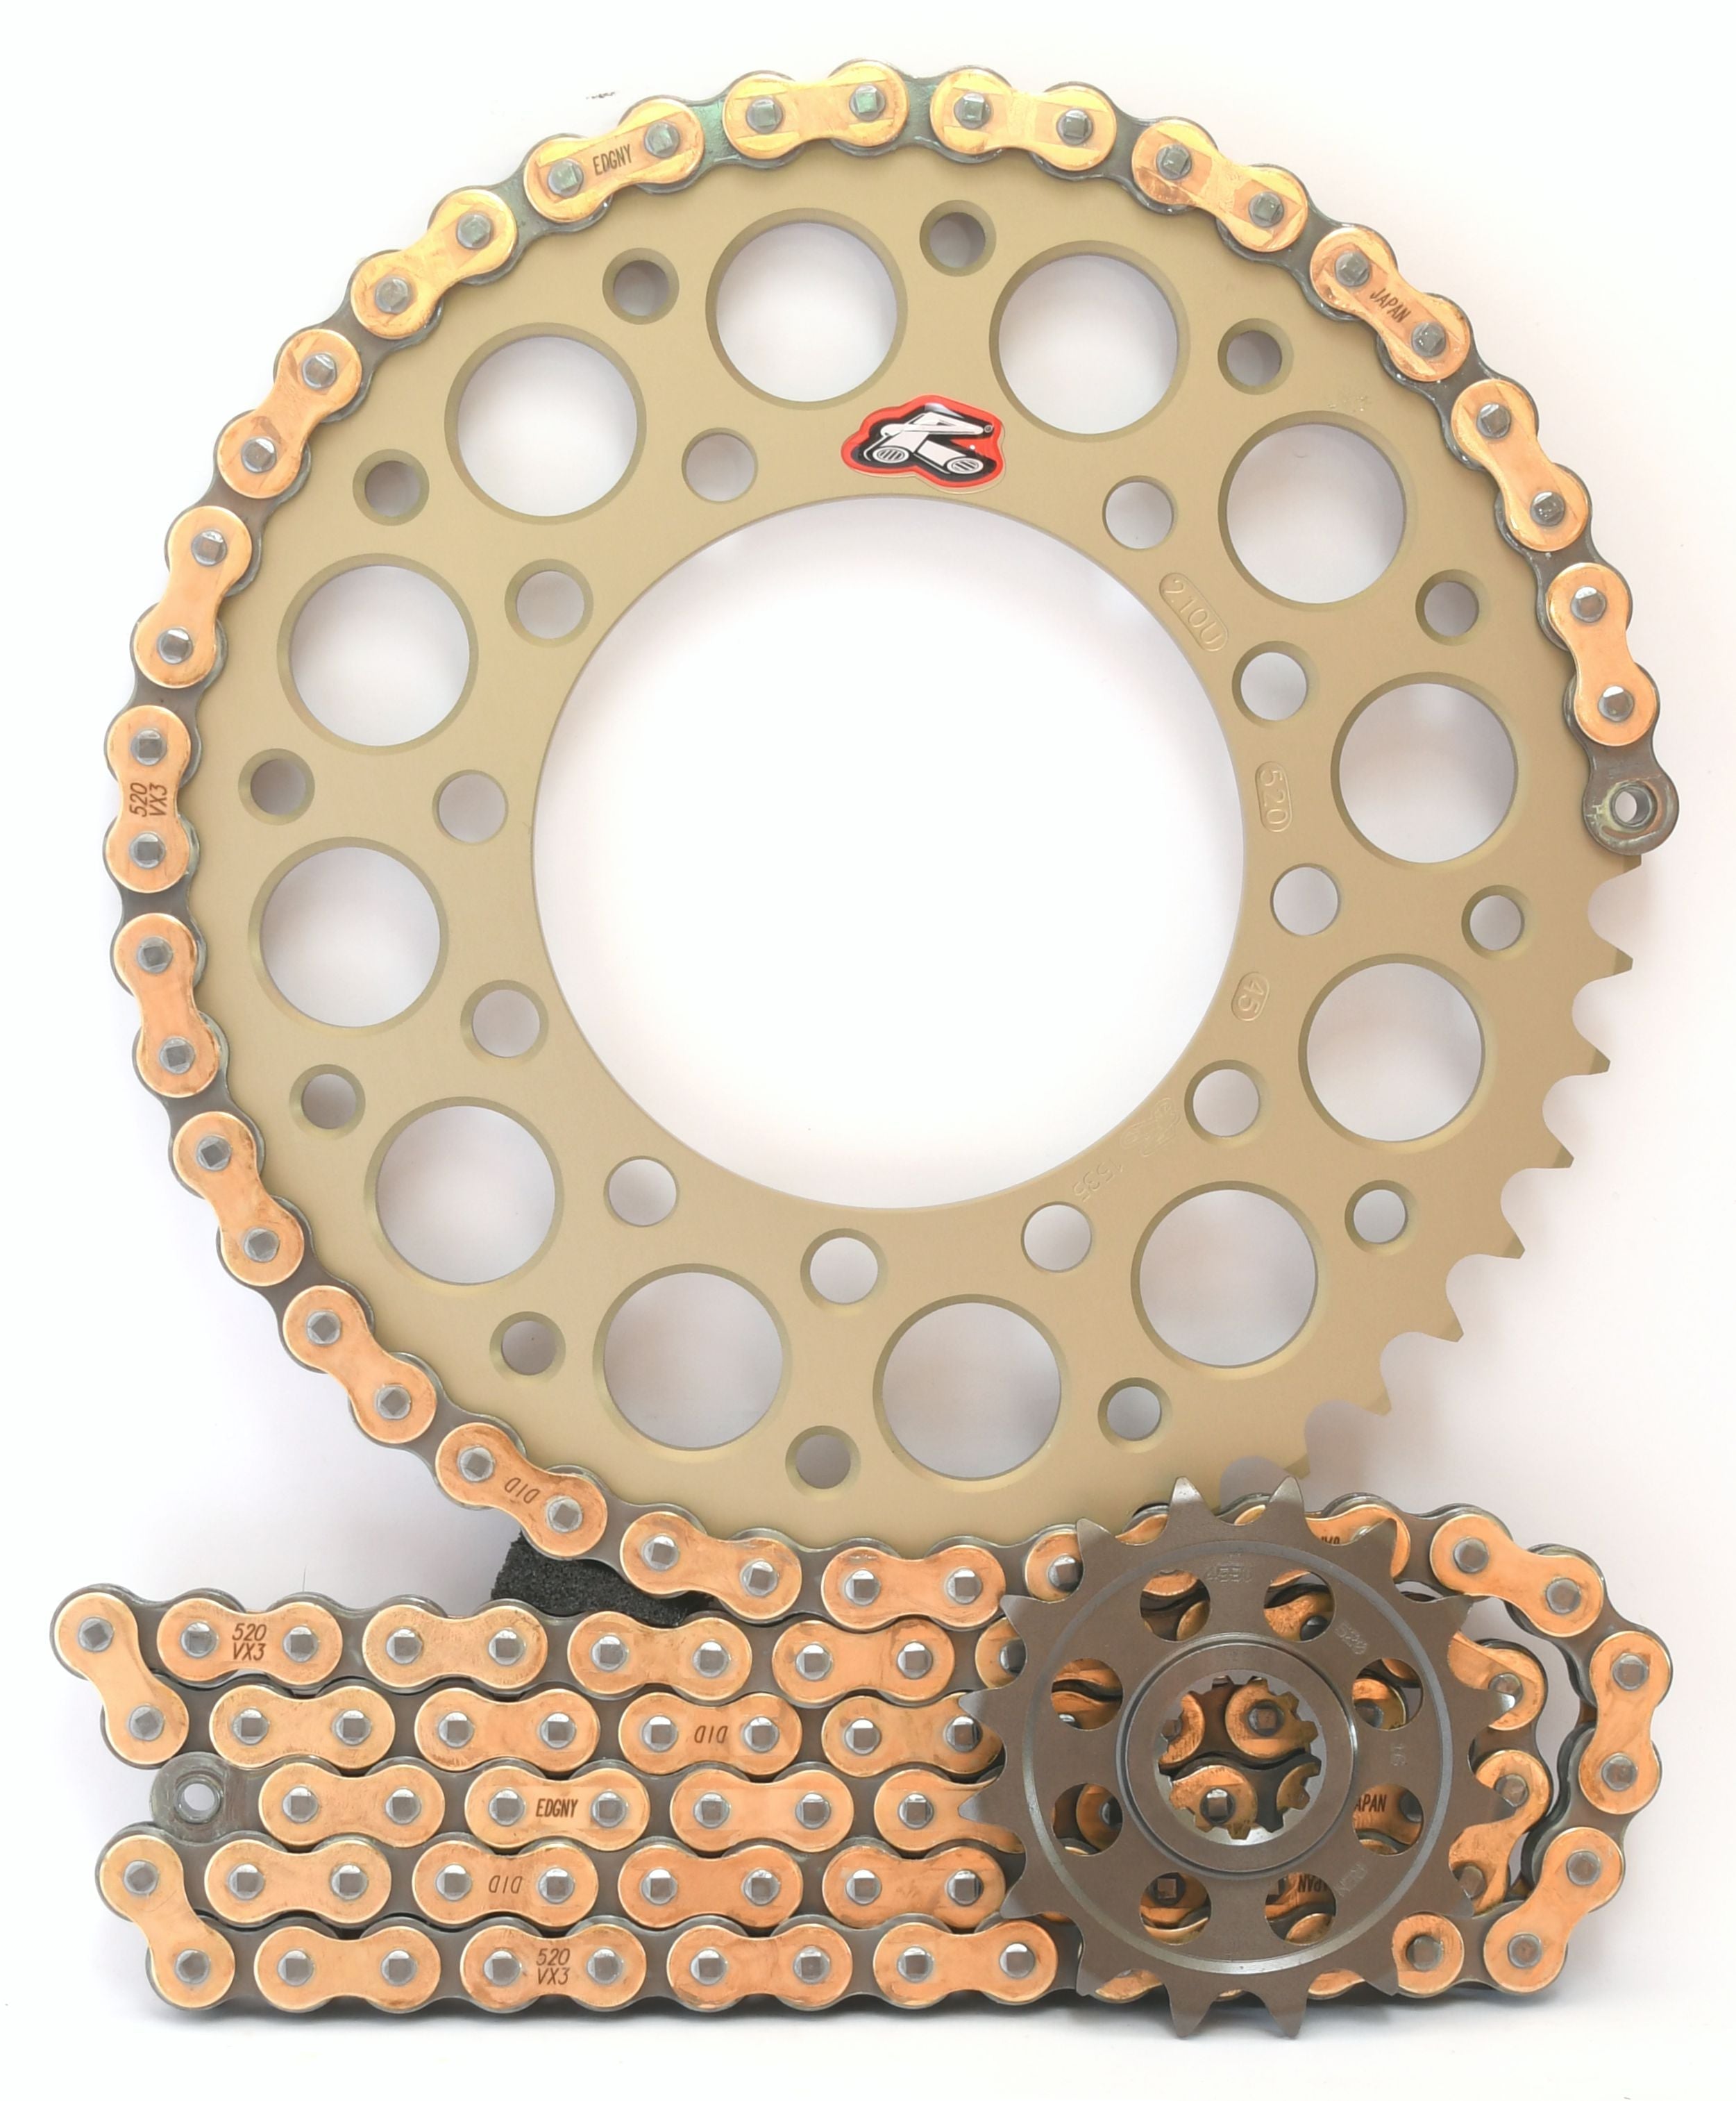 Renthal Ultralight and DID 520 Conversion Chain & Sprocket Kit for Yamaha YZF R1 2006-2008 - Standard Gearing